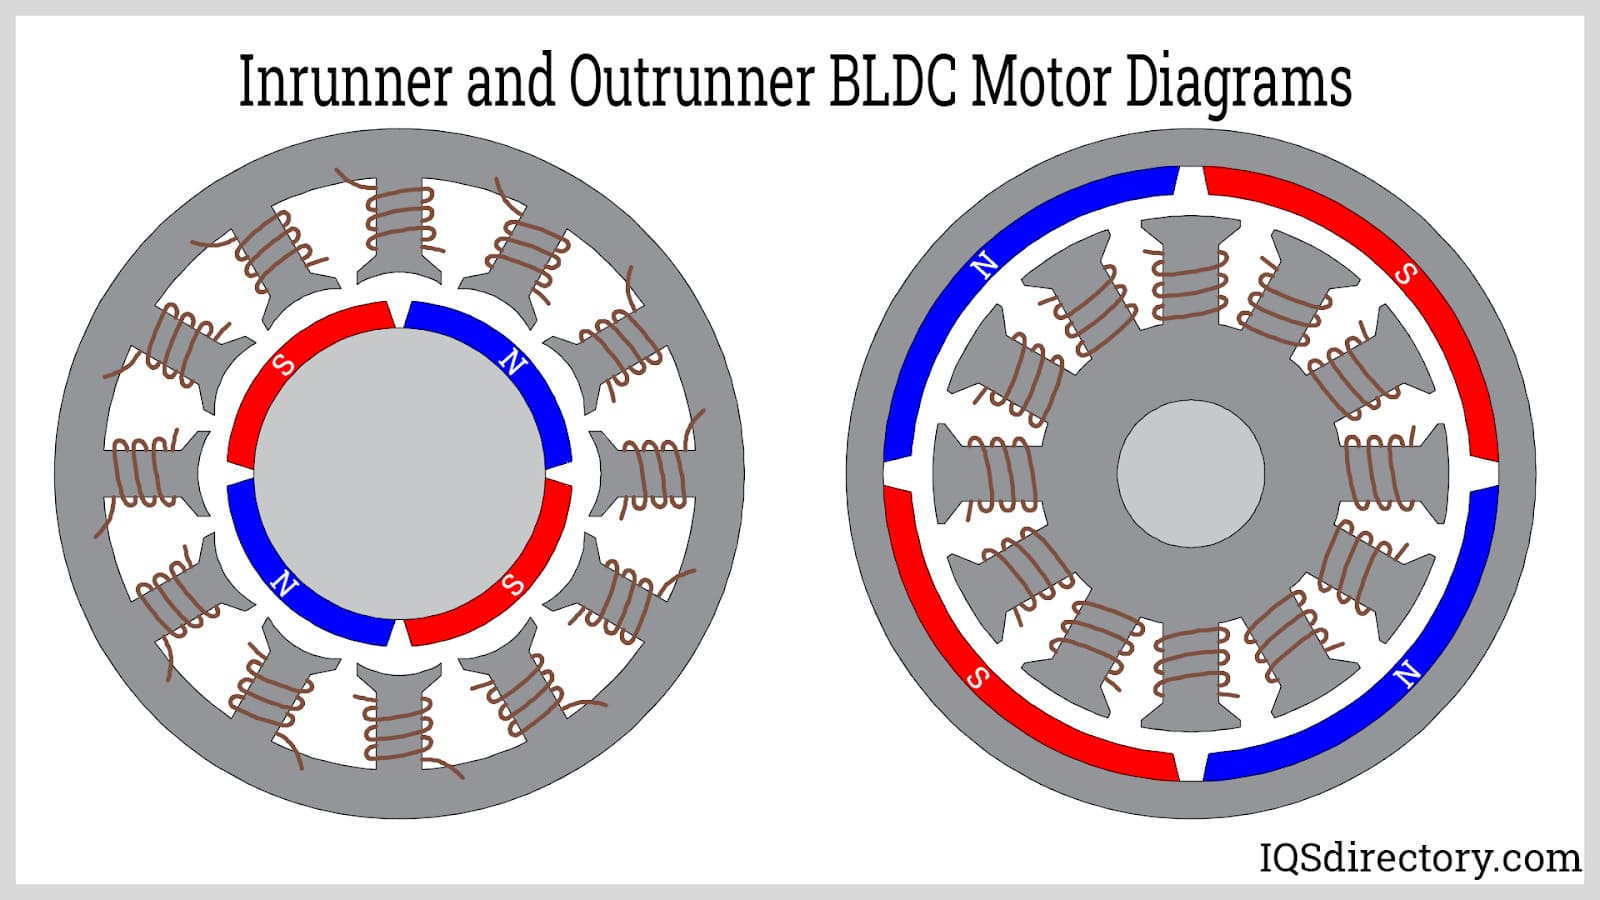 Inrunner and Outrunner BLDC Motor Diagrams